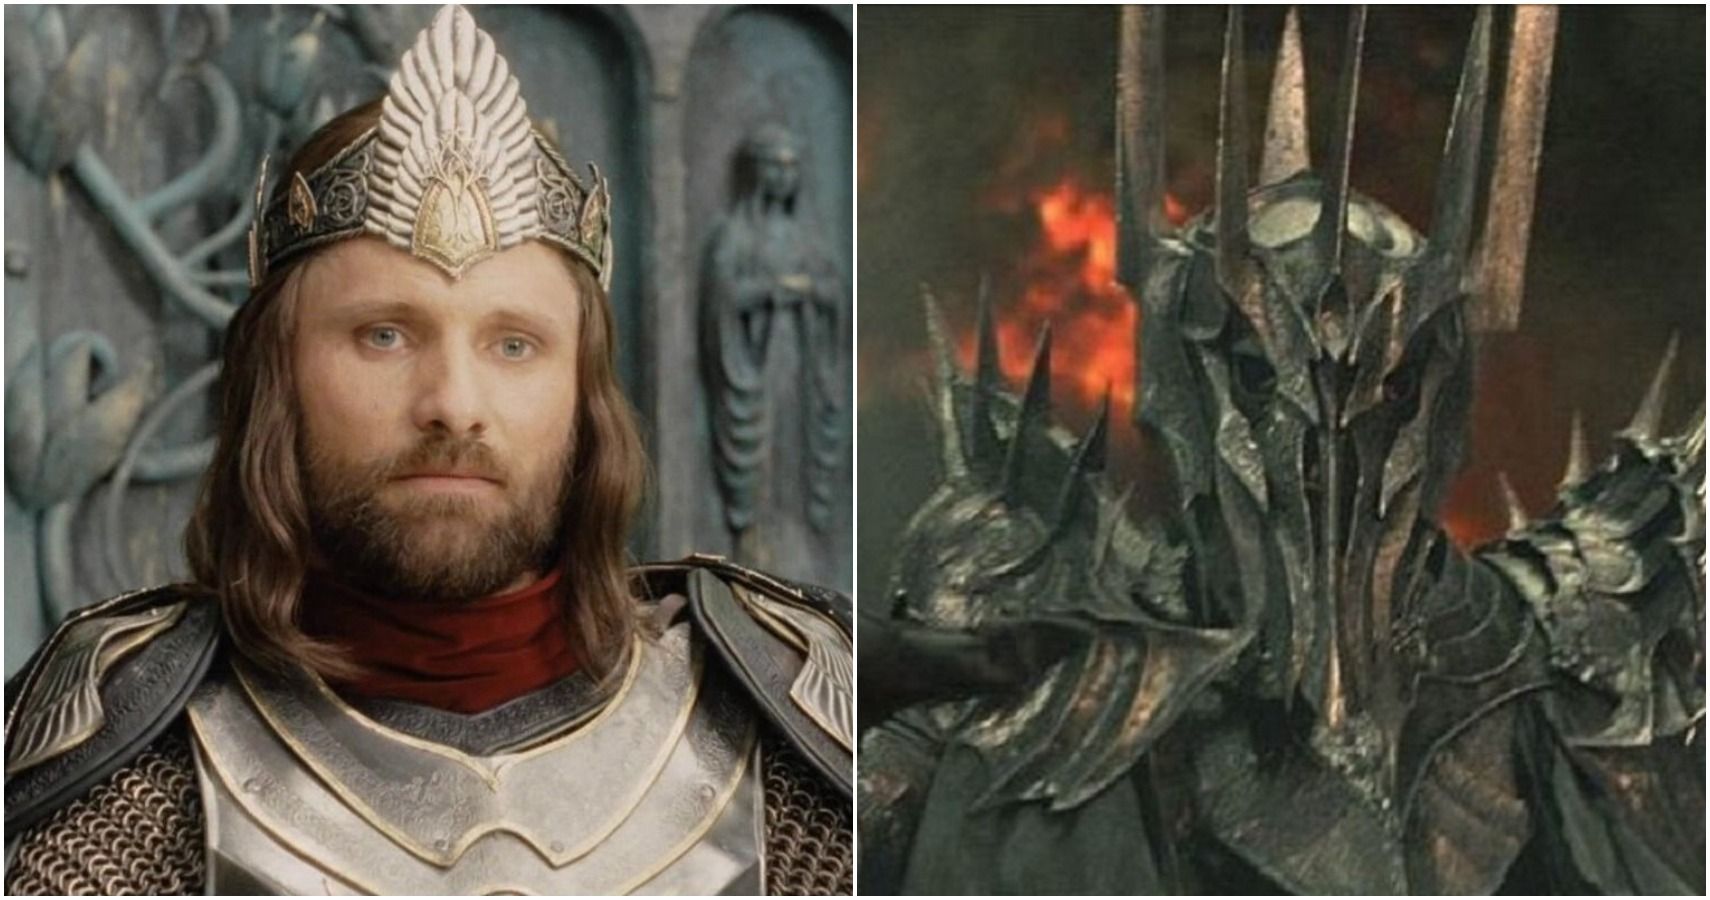 Lord Of The Rings 5 Changes From The Books That Helped The Movies (& 5 That Hurt Them)